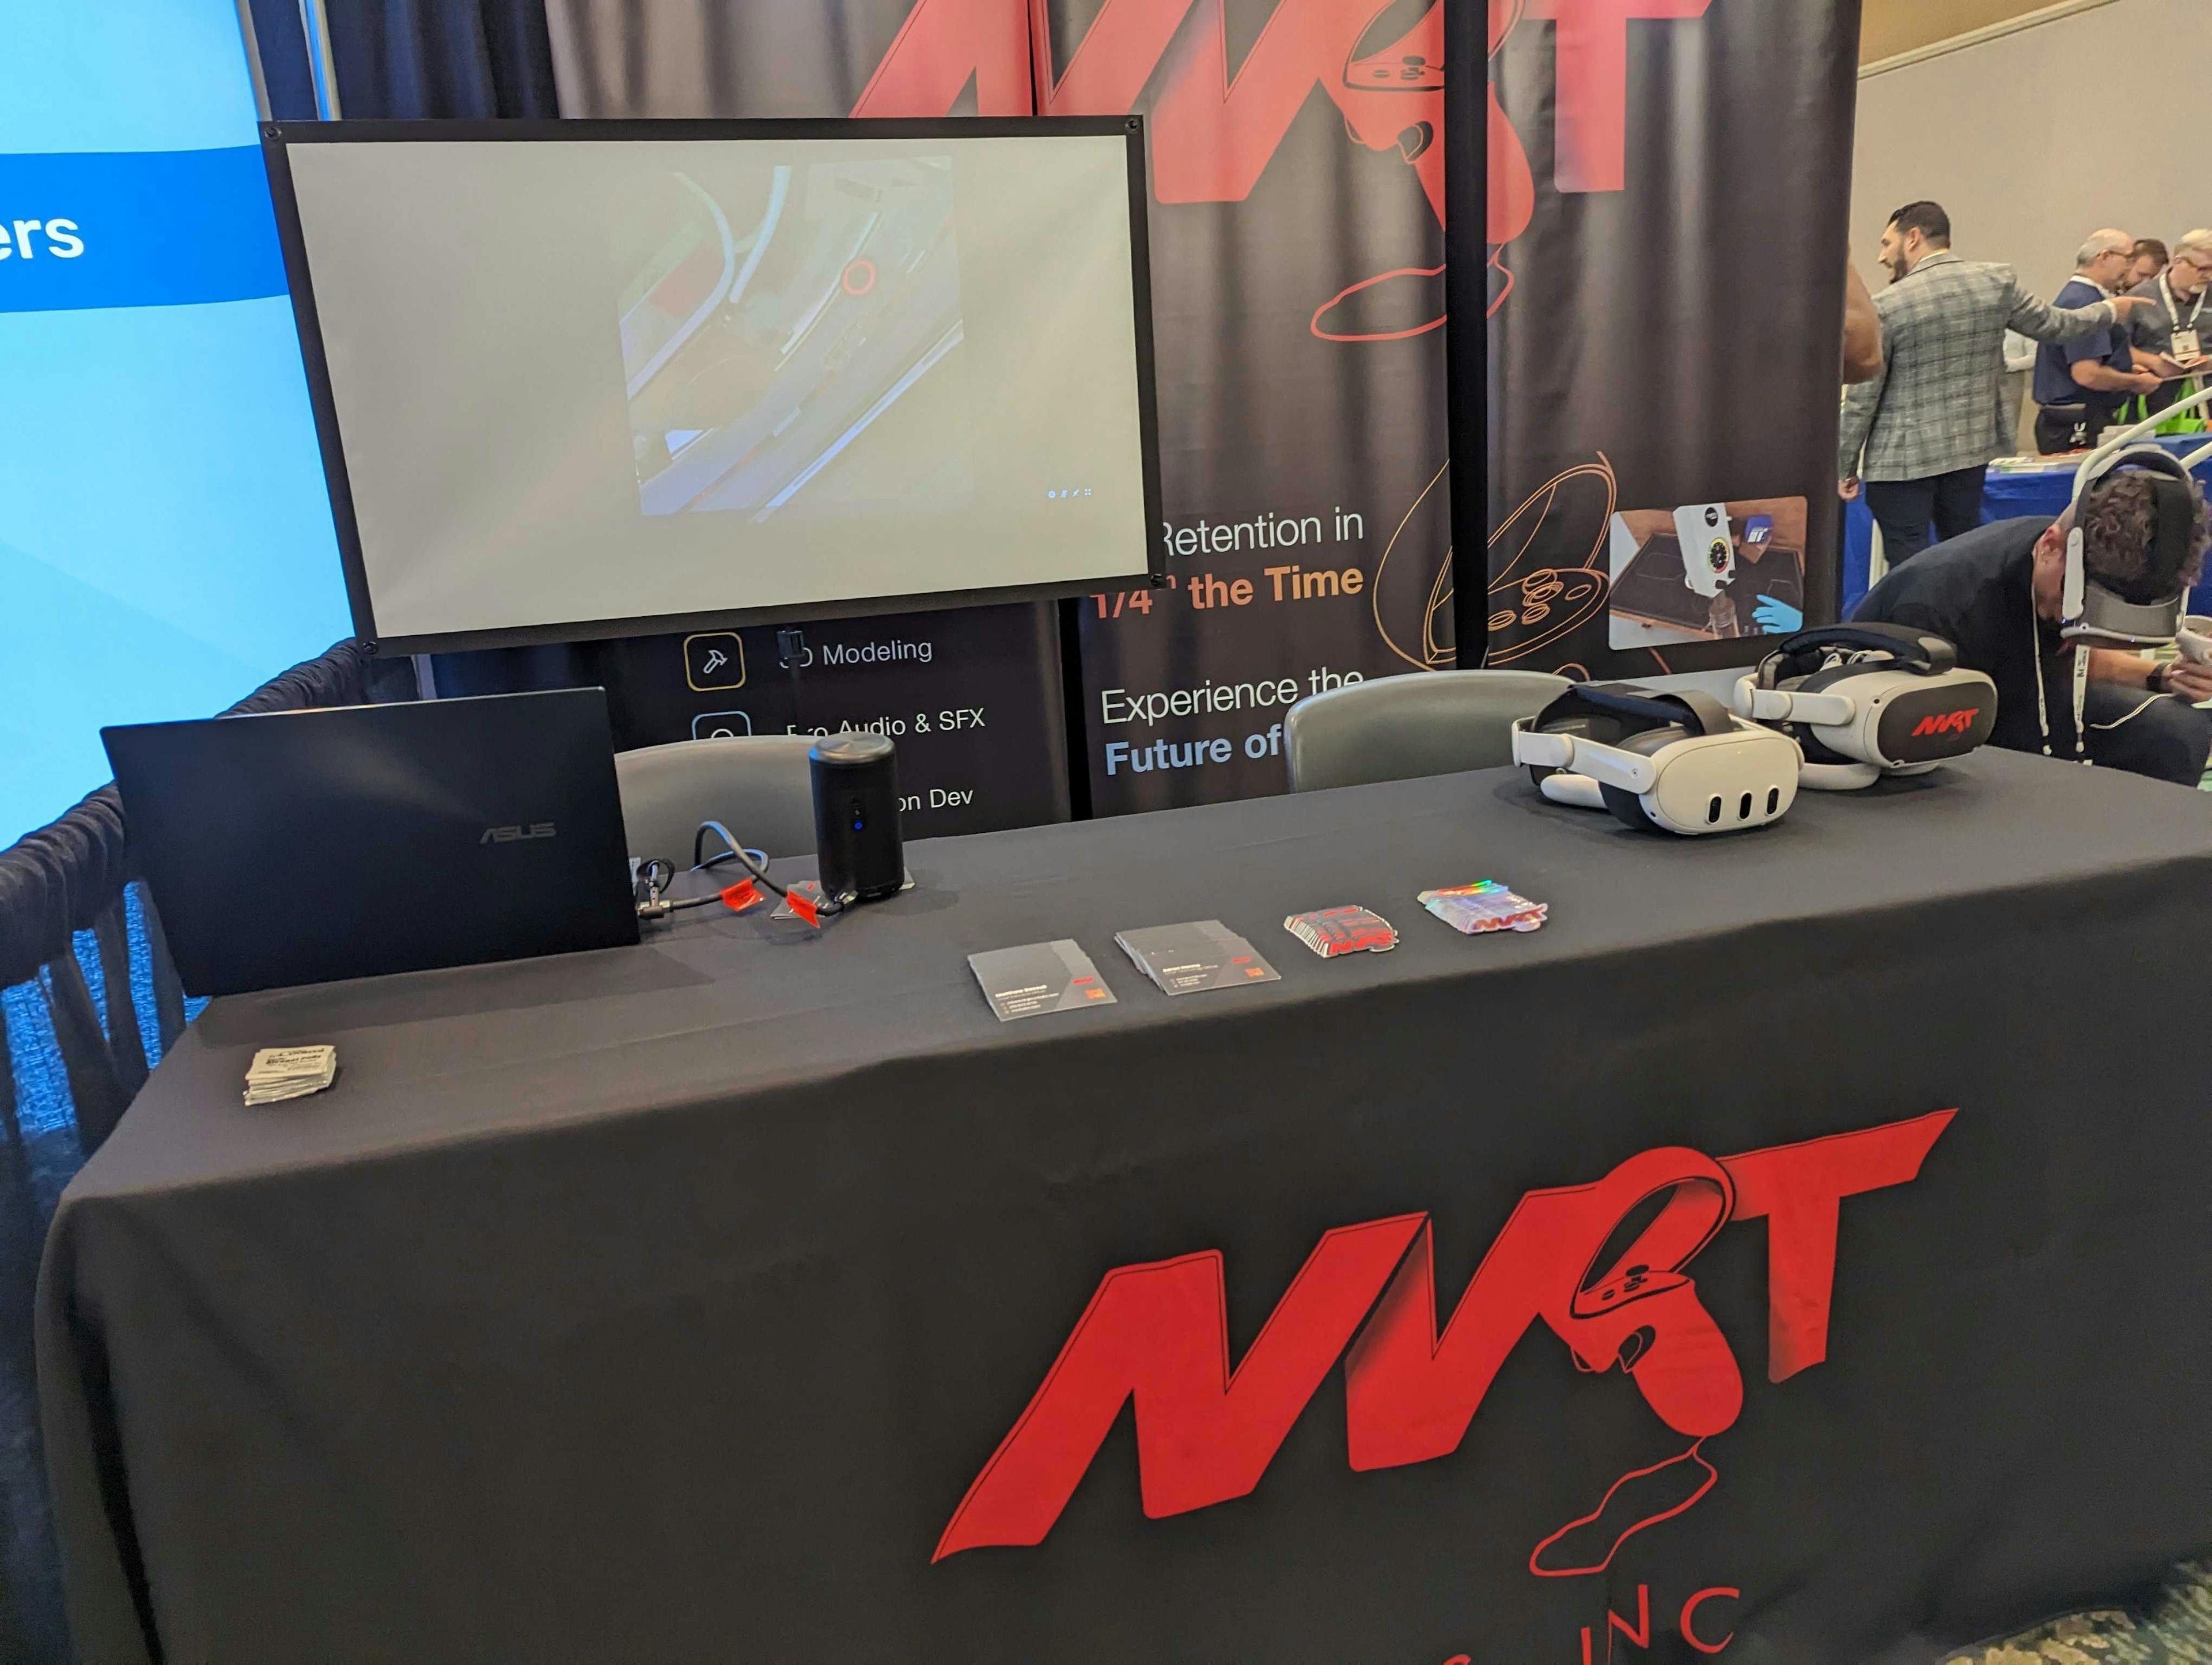 NVRT Showed off New Content and Hardware at MD Expo Orlando 